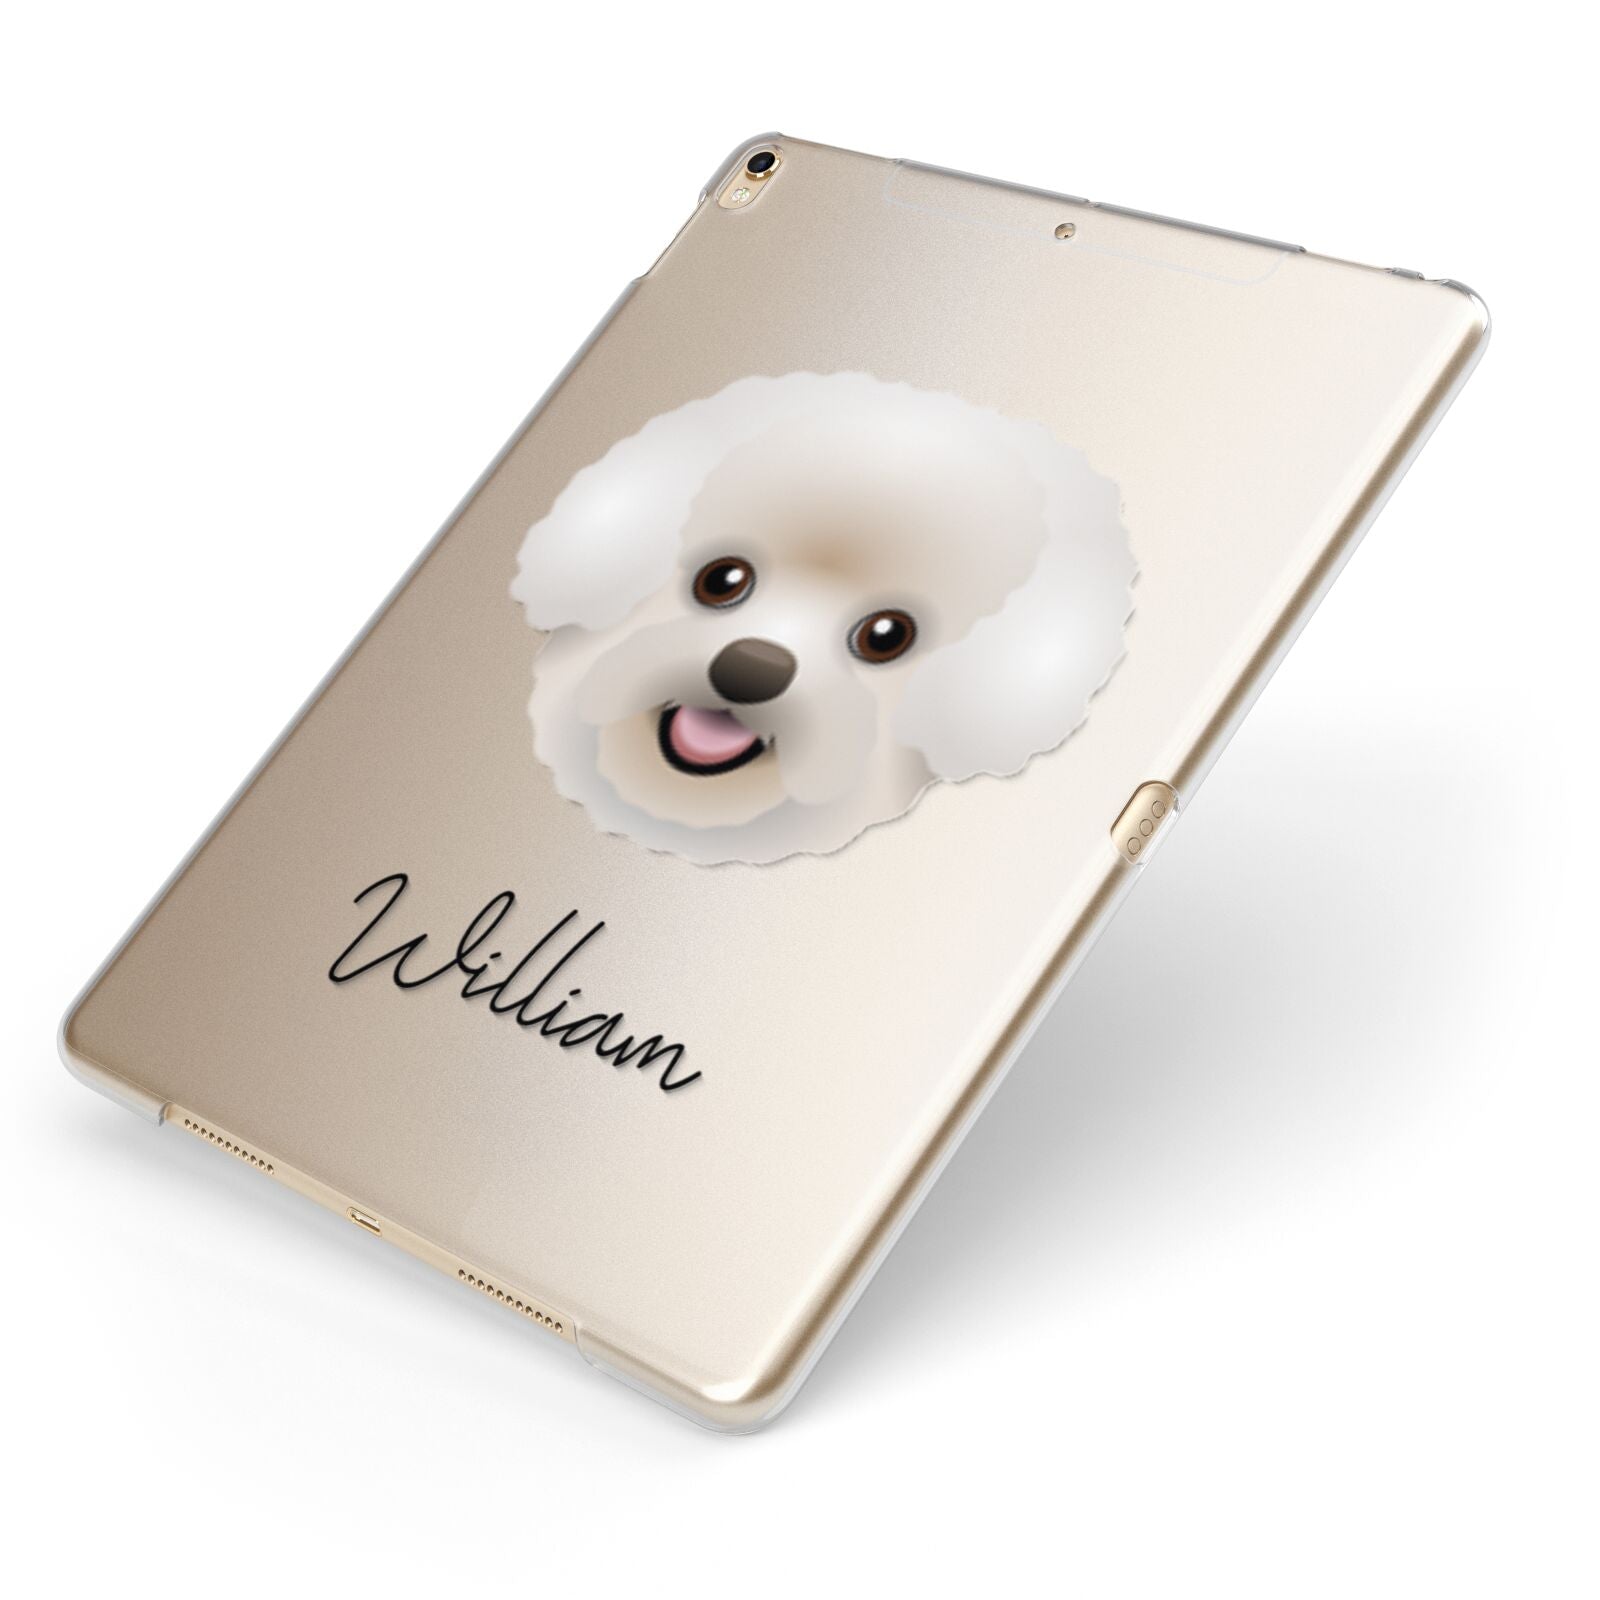 Bichon Frise Personalised Apple iPad Case on Gold iPad Side View